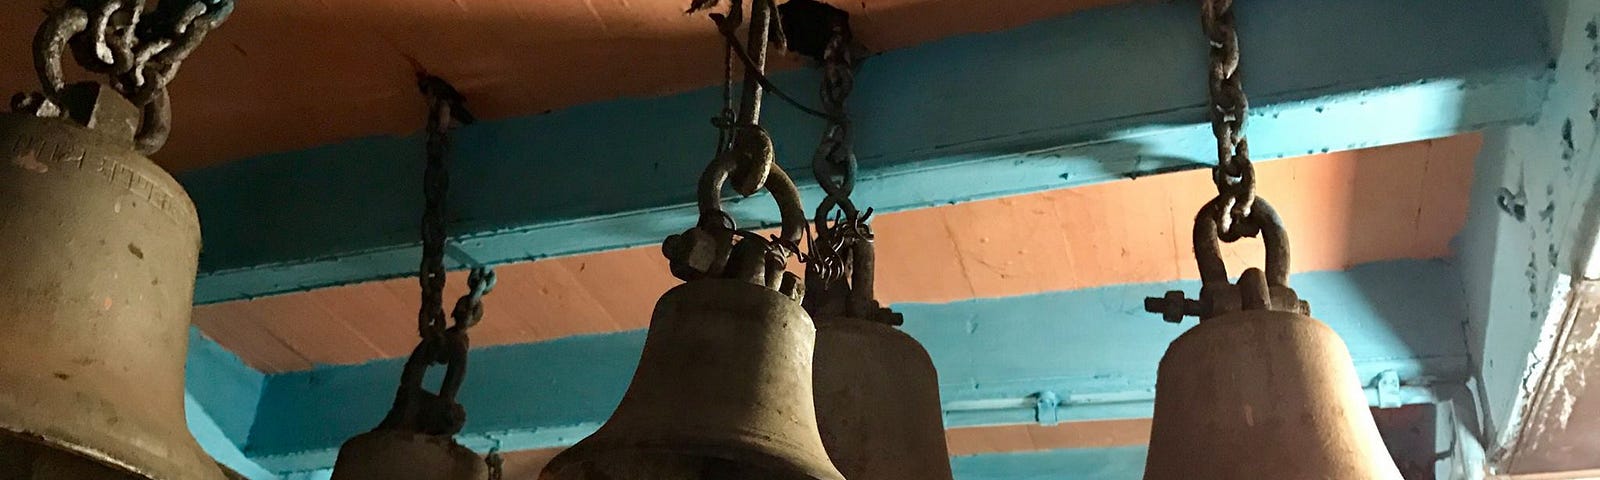 Bells in an ancient Lord Shiva temple hanging from the rafters.